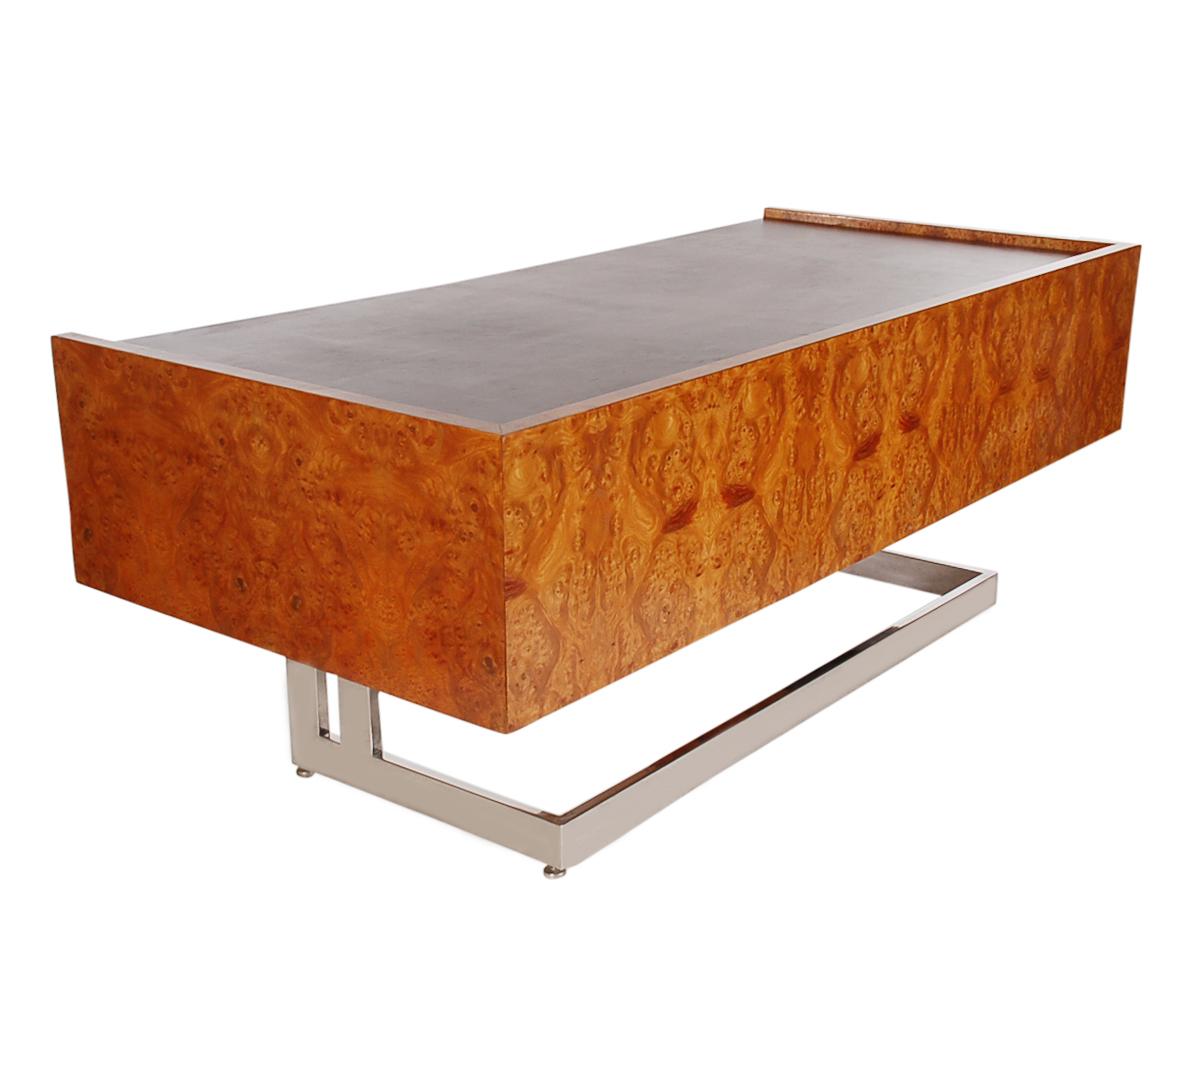 Late 20th Century Monumental Cantilevered Mid-Century Modern Executive Desk in Burl and Chrome